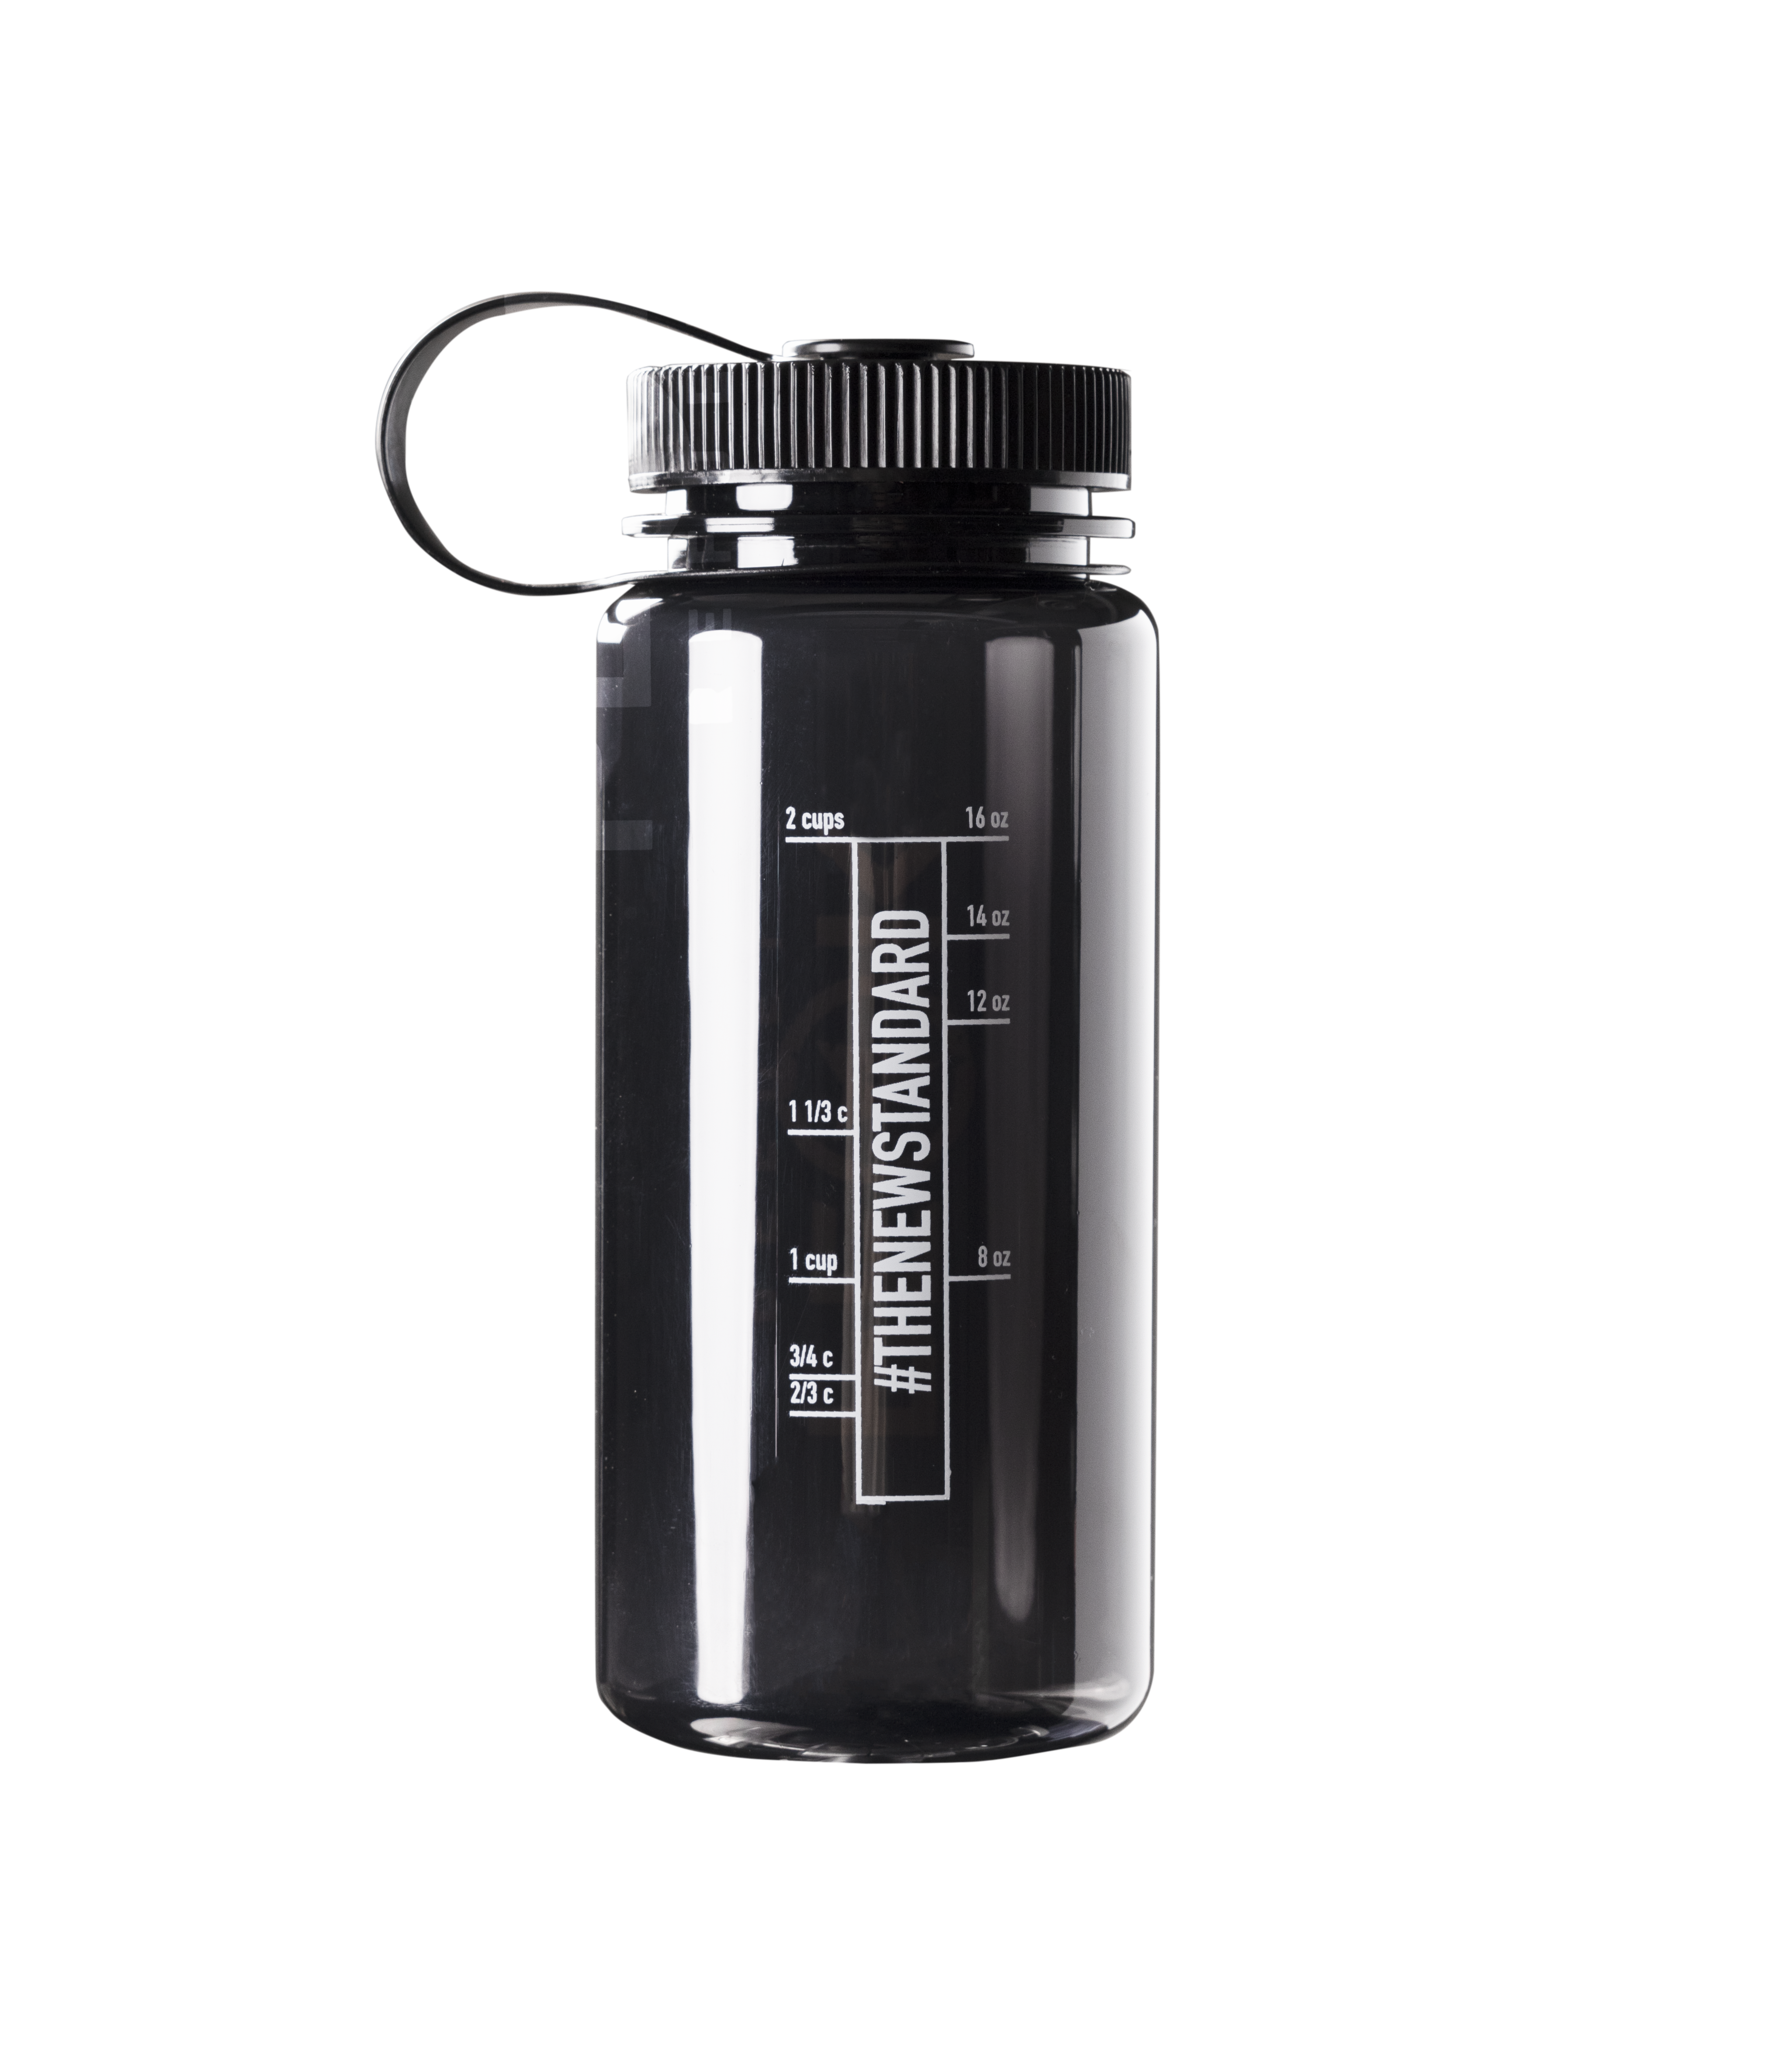 A black water bottle with a black cap, featuring white text.